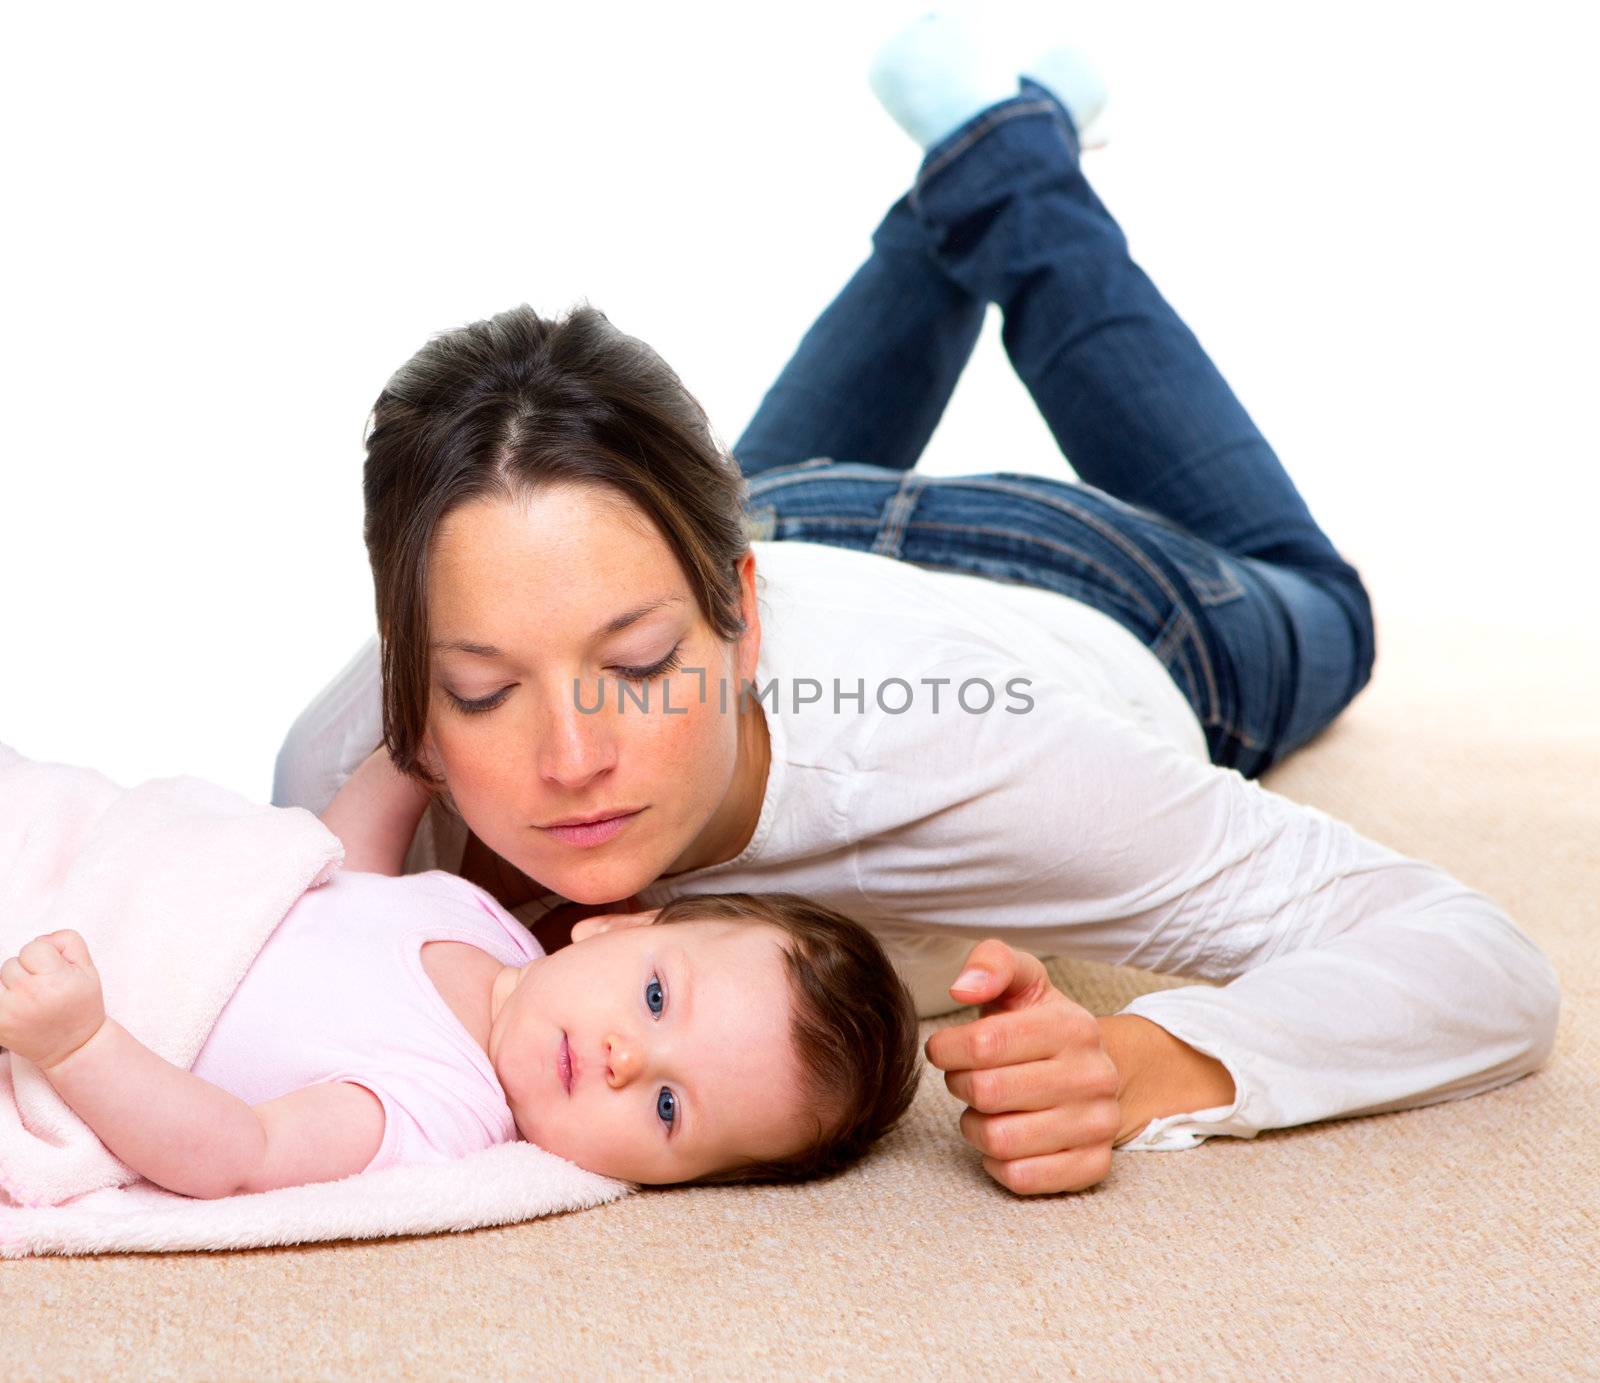 Baby and mother lying on beige carpet together by lunamarina